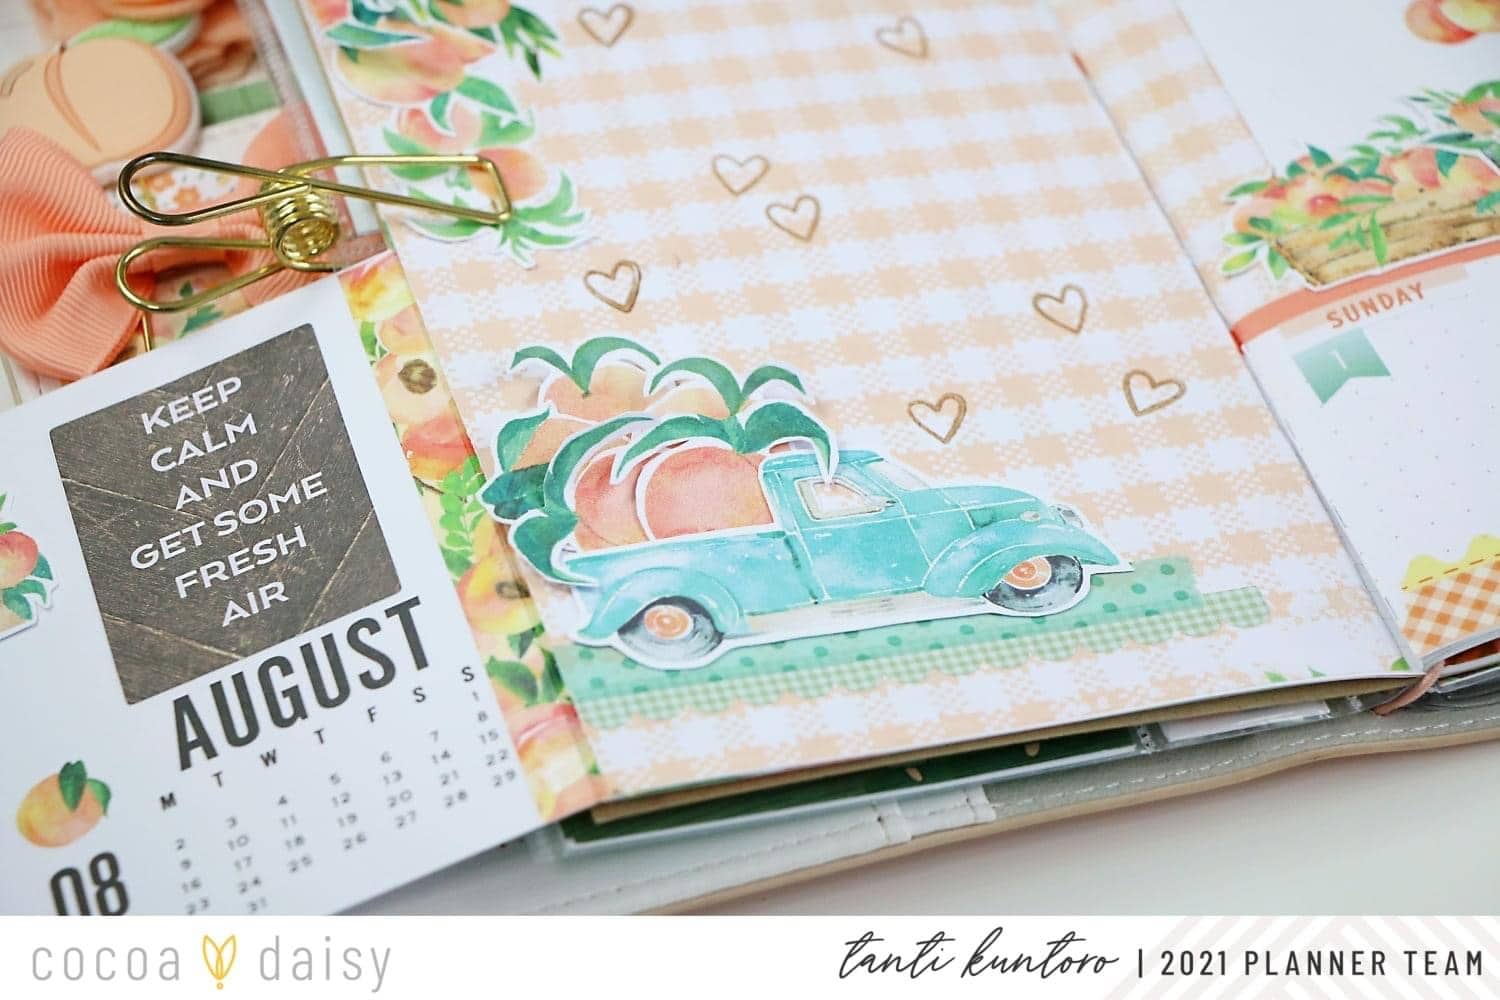 Your Planner Can Be Fun and Functional with Cocoa Daisy!